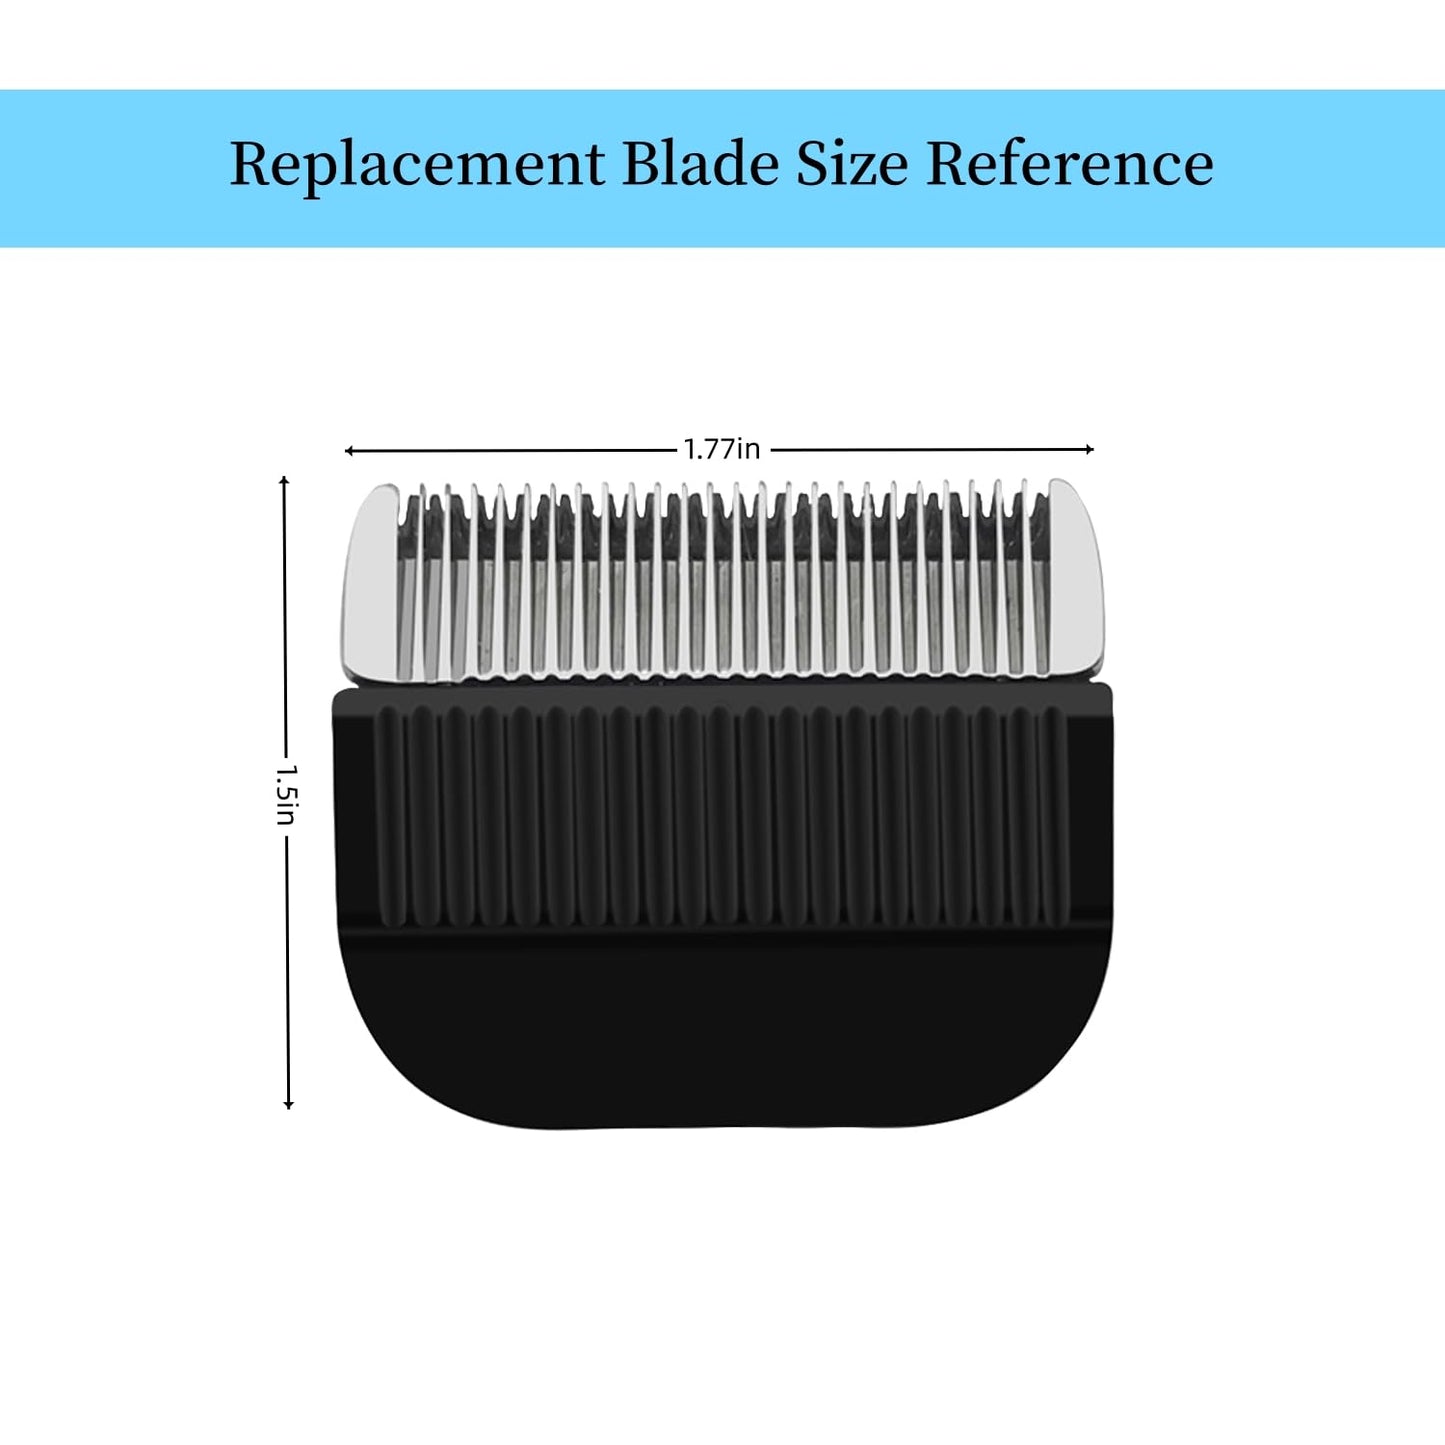 2 Pcs Hair Clipper Detachable Replacement Blades, Compatible with wahl Models 9649 and 79434 Hair Clippers